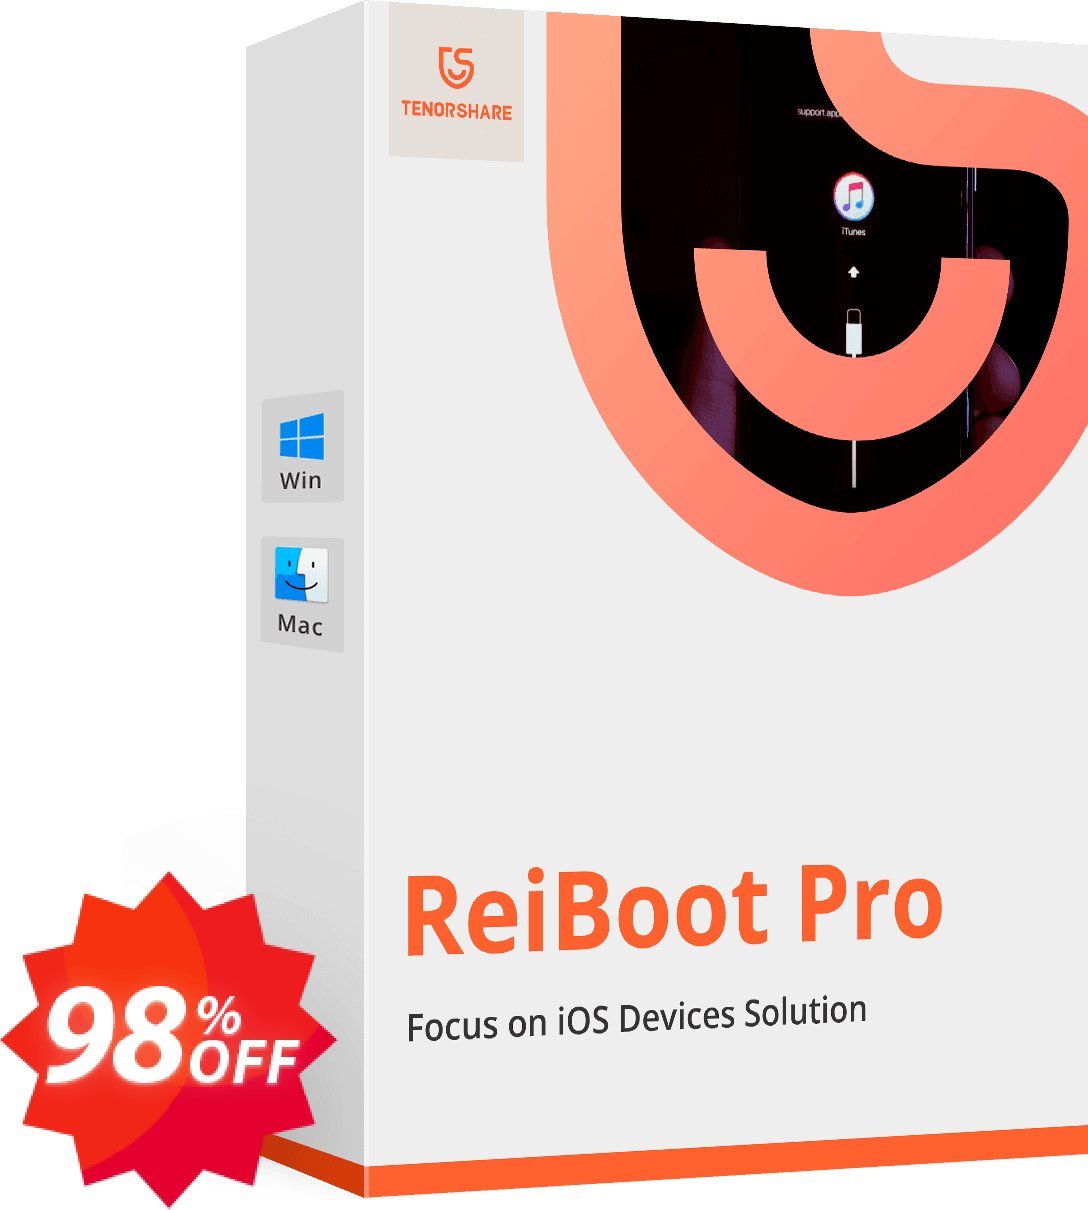 Tenorshare ReiBoot Pro, 6-10 Devices  Coupon code 98% discount 